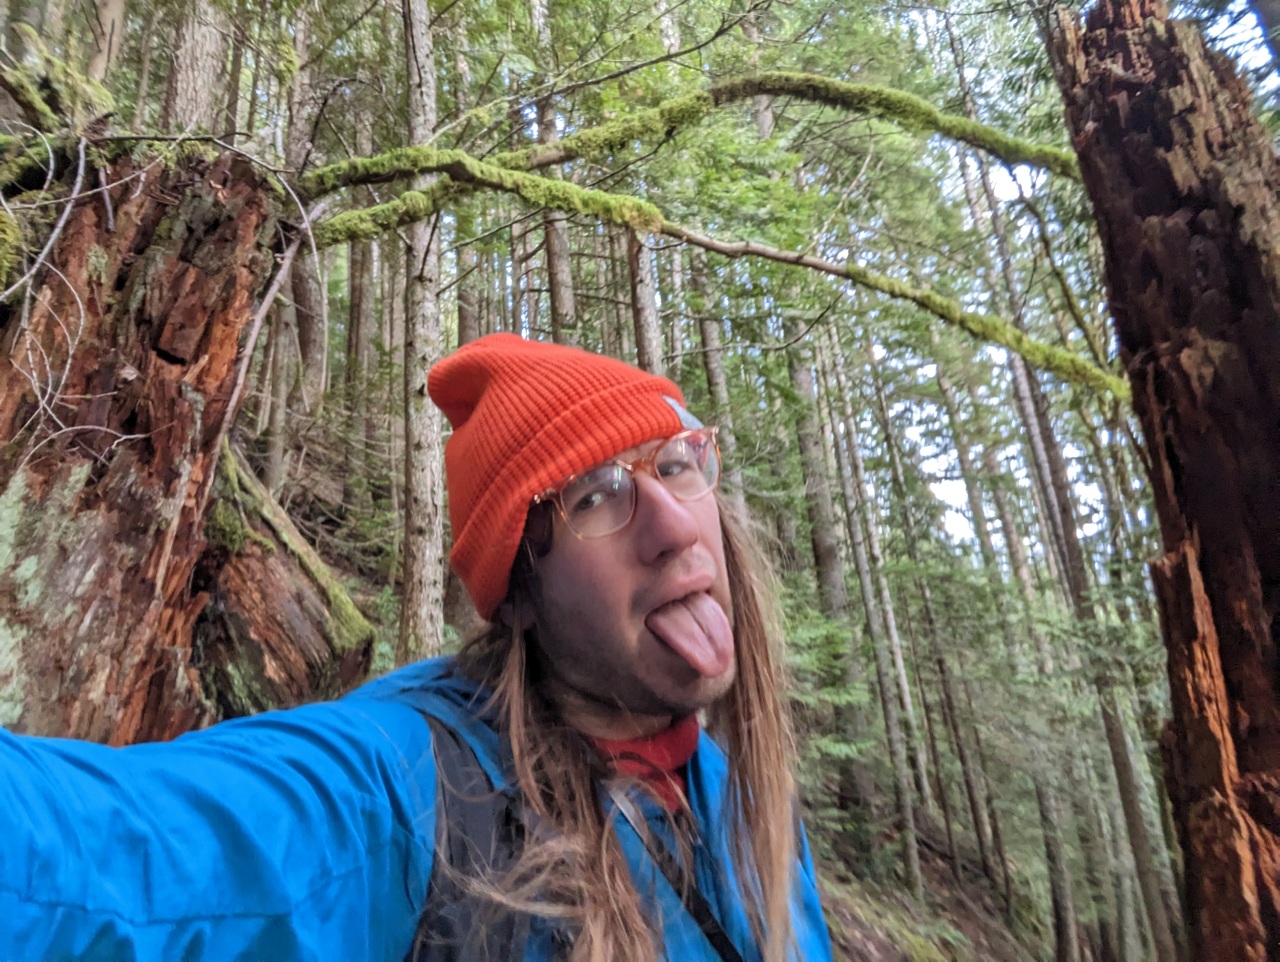 An alternate photo I had in the running for my self-portrait on 52 Frames. Taken while hiking my first hike of the year.